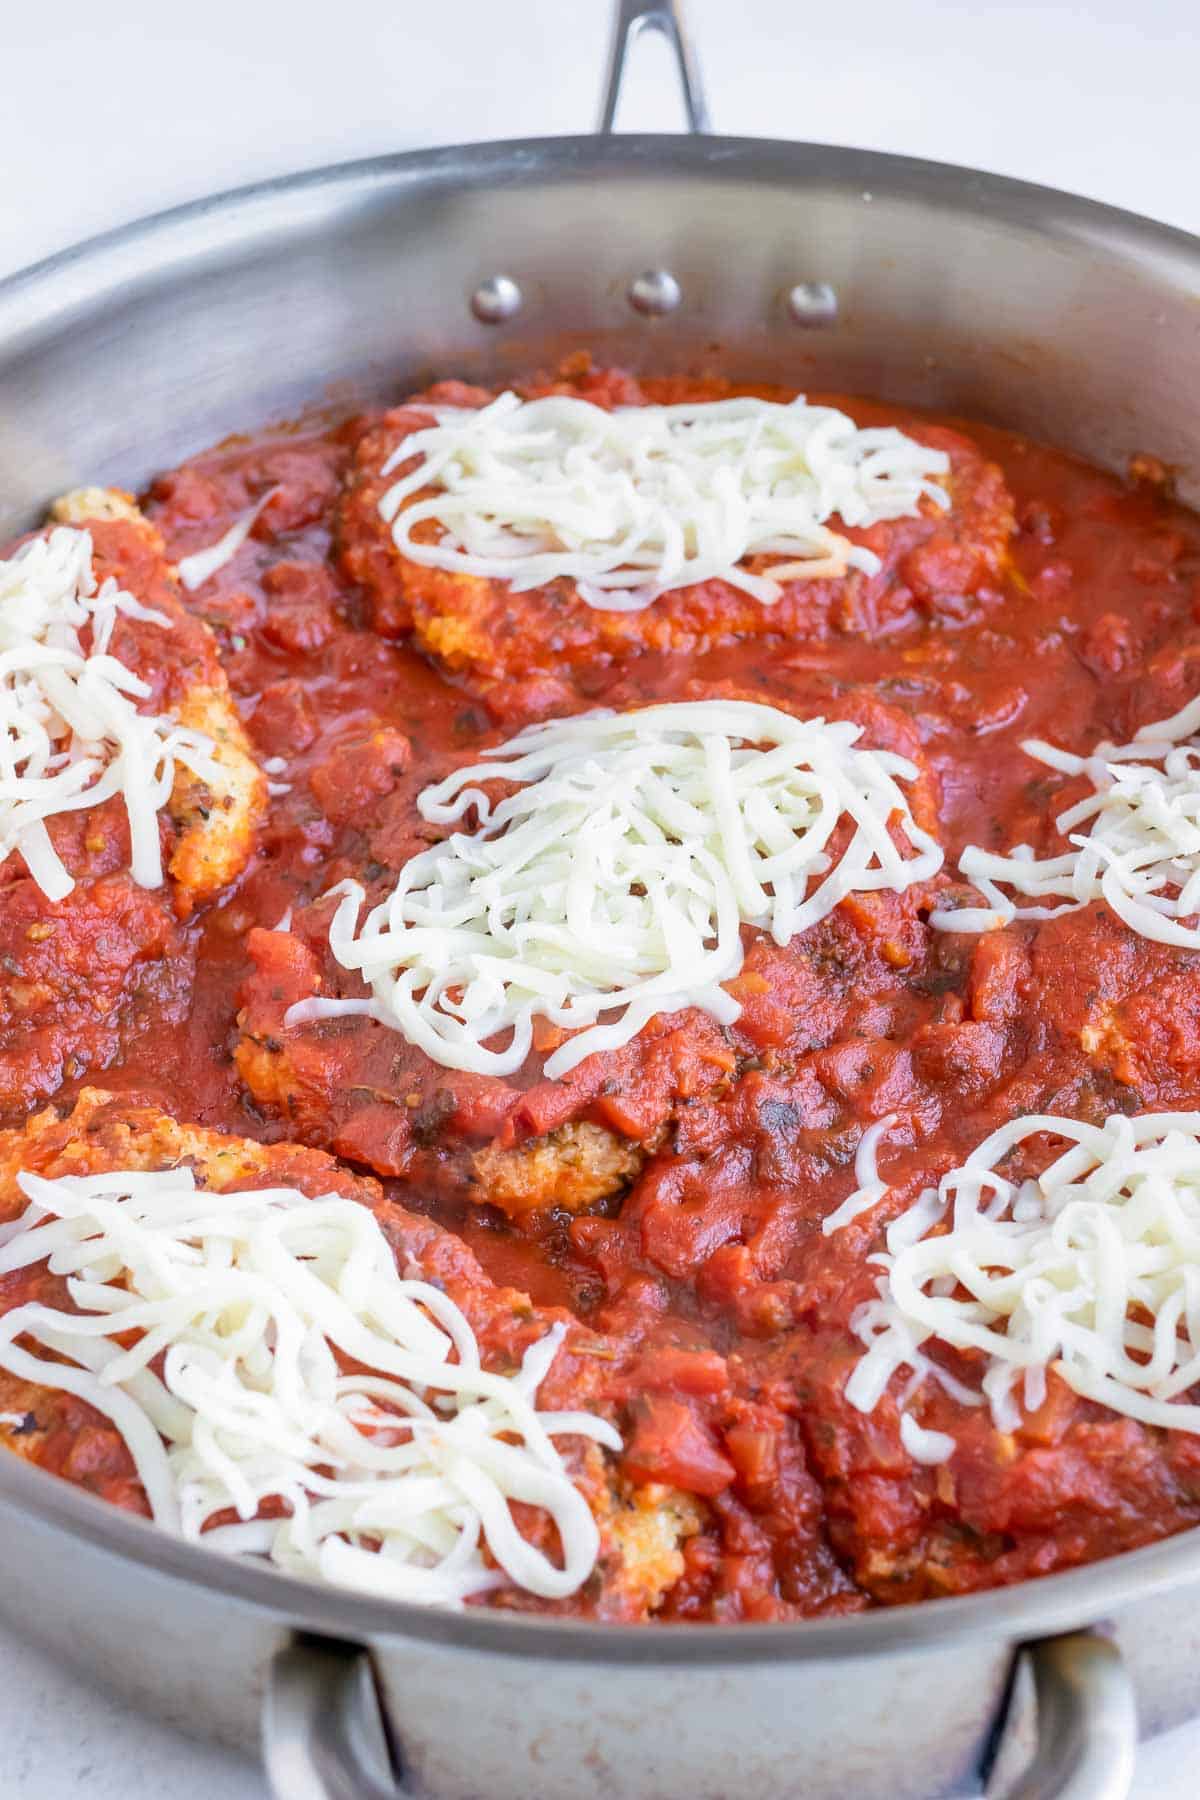 Top the chicken parmesan with mozzarella cheese for this easy meal.